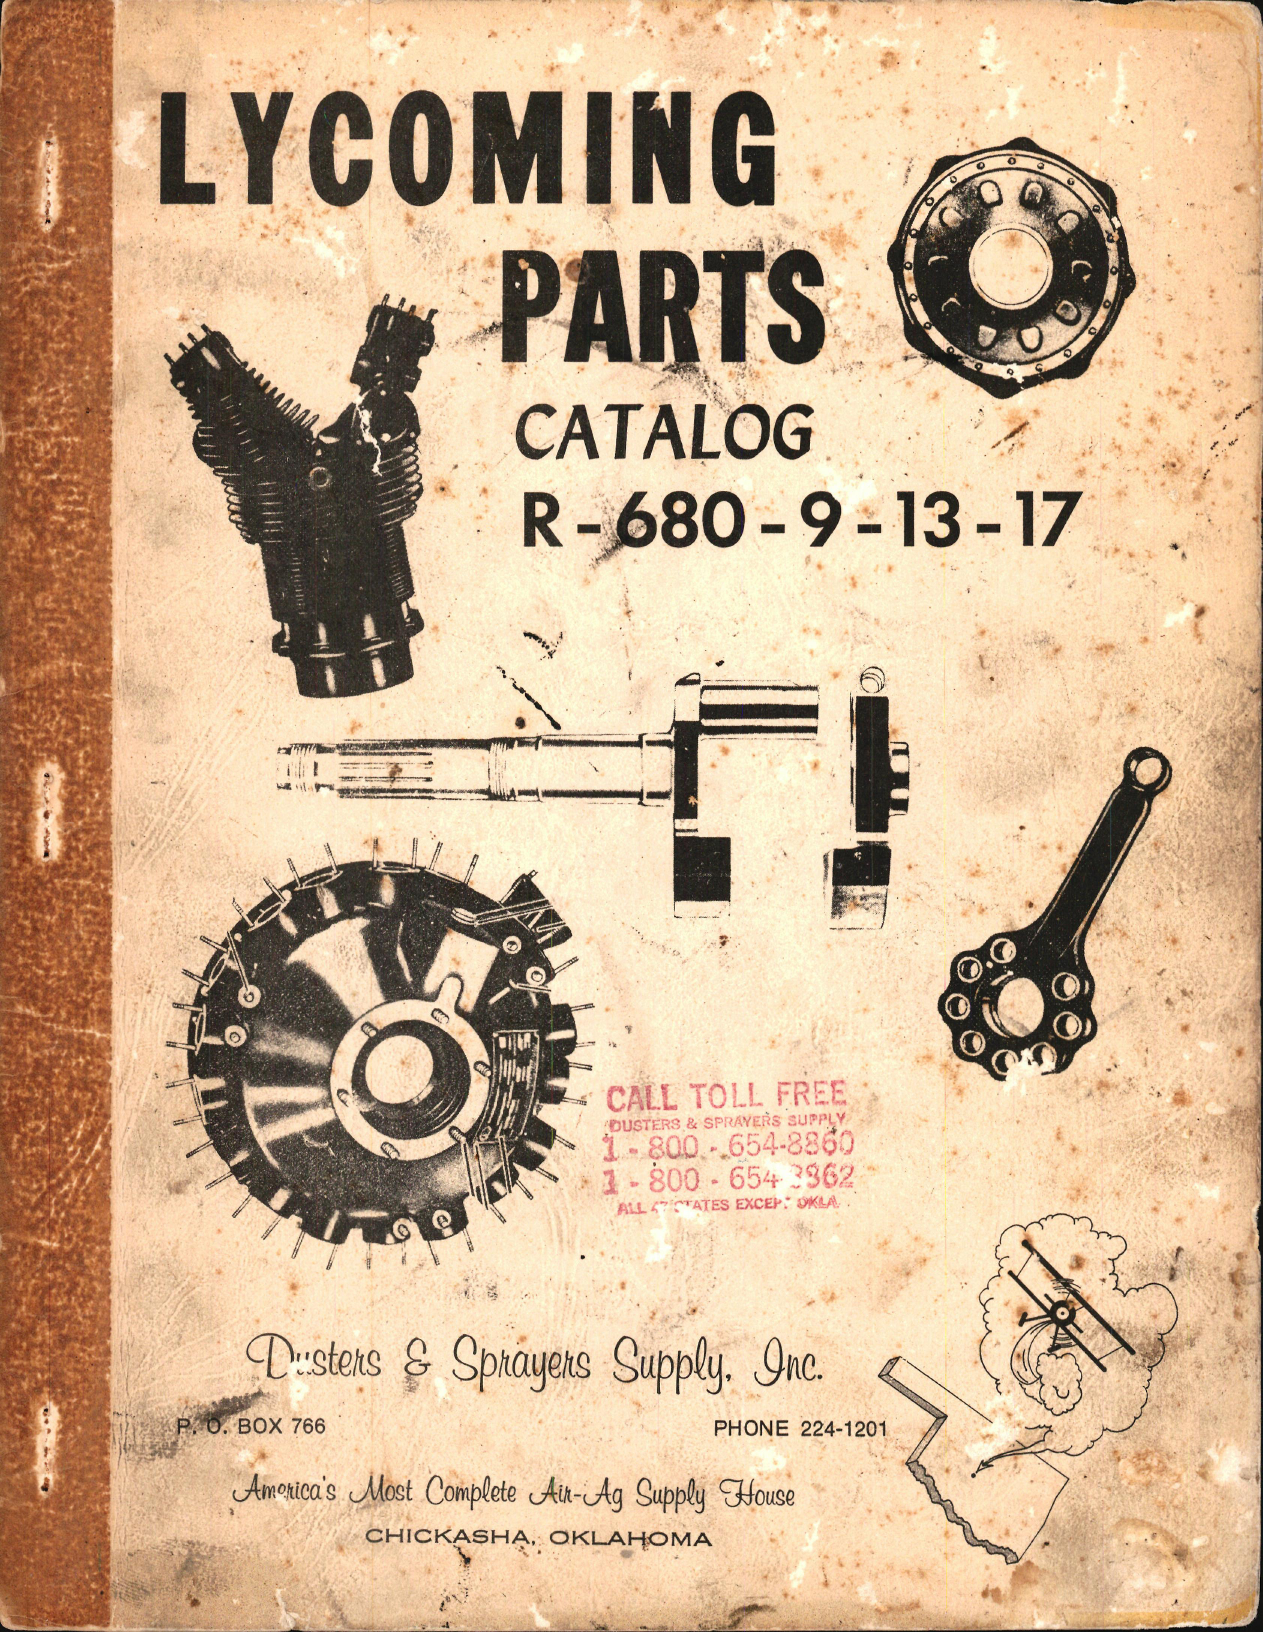 Sample page 1 from AirCorps Library document: Parts Catalog for Lycoming R-680-9, -13, and -17